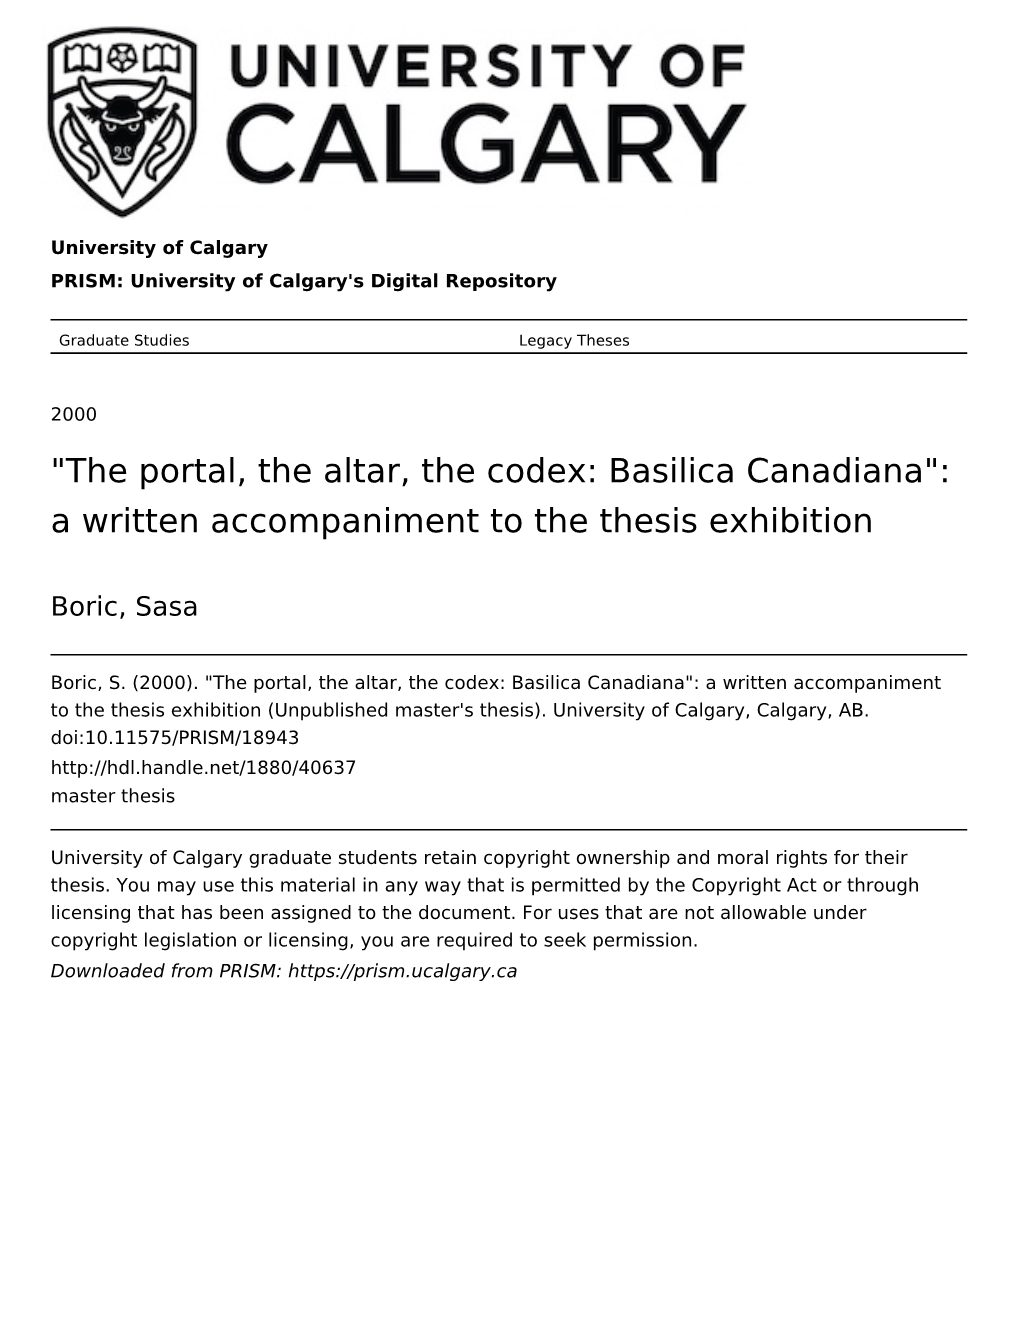 The Altar, the Codex: Basilica Canadiana": a Written Accompaniment to the Thesis Exhibition